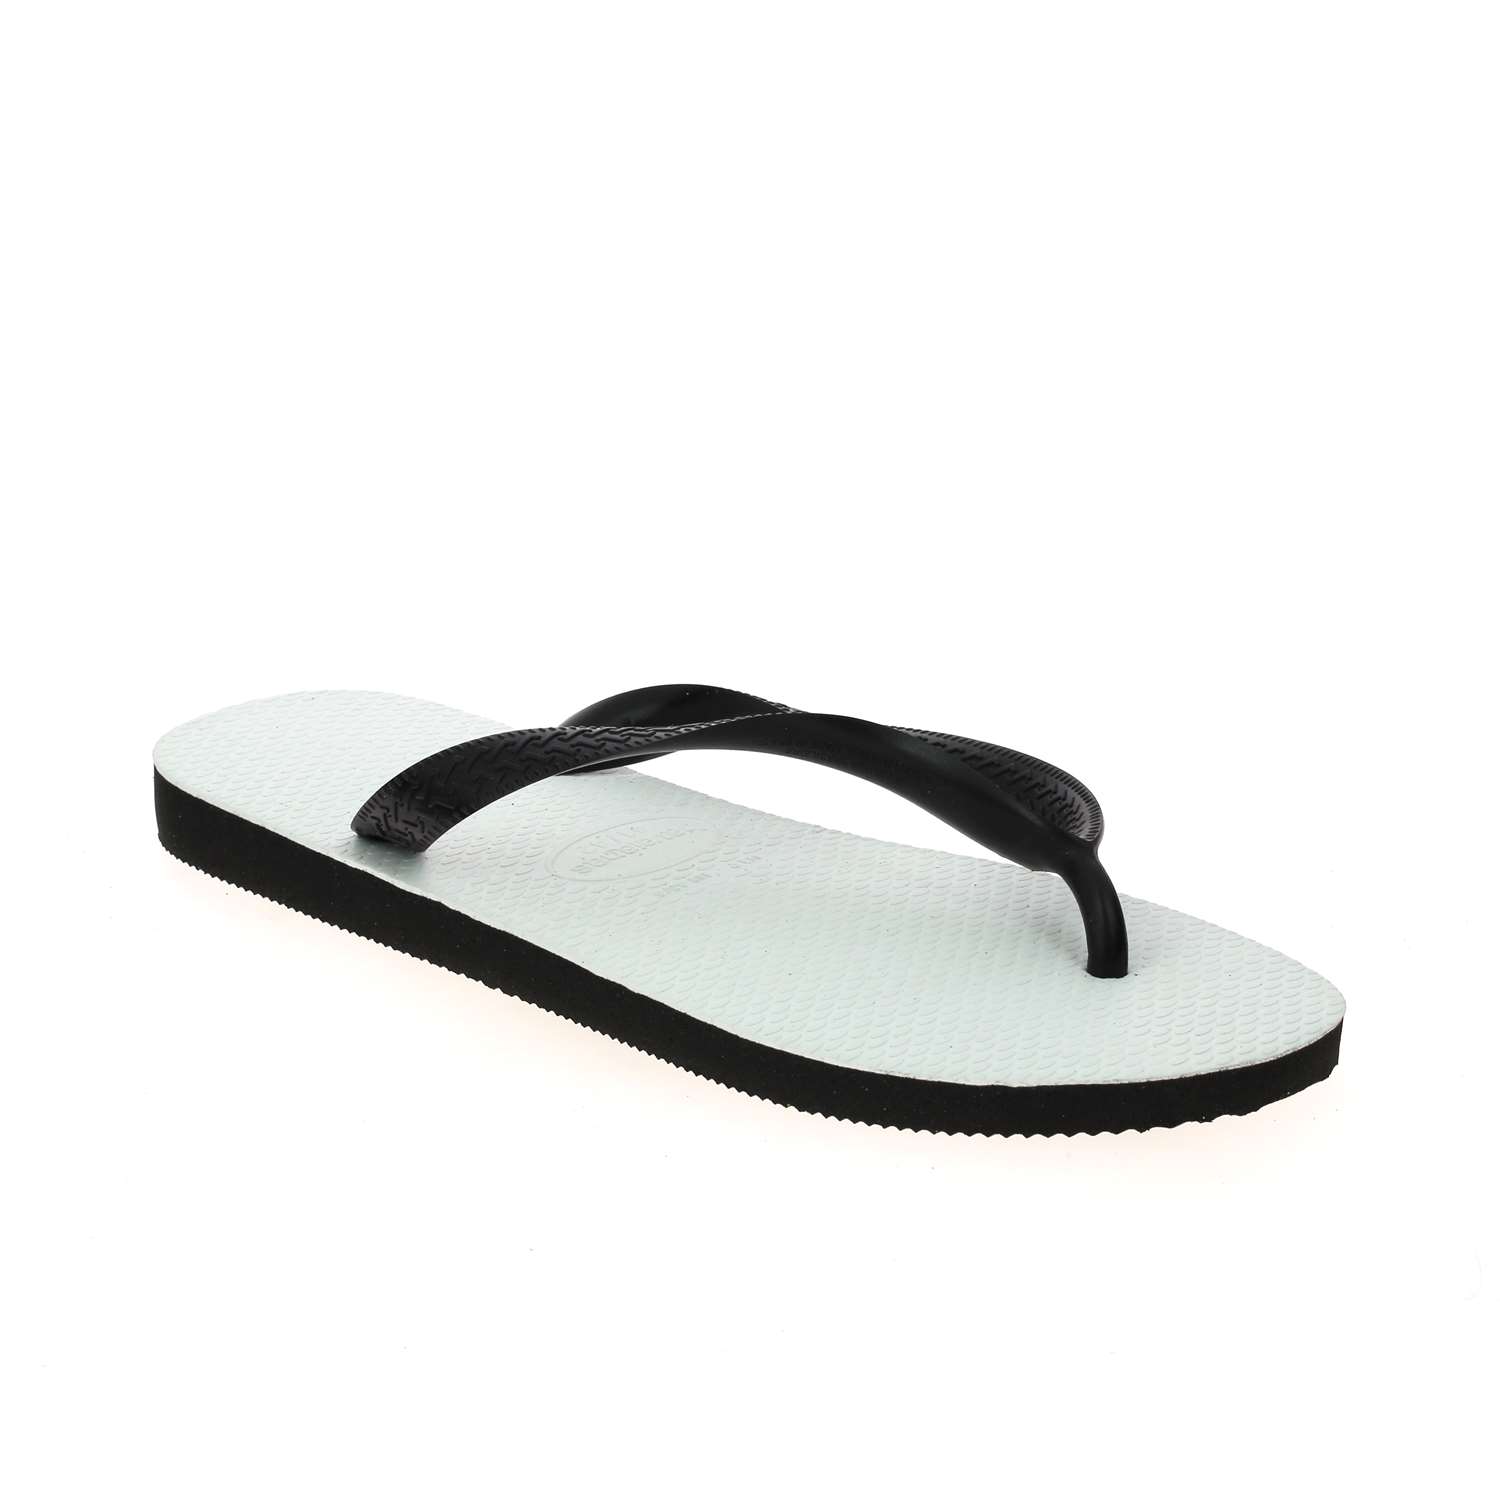 1 - TRADITIONAL - HAVAIANAS - Tongs et crocs - Synthétique